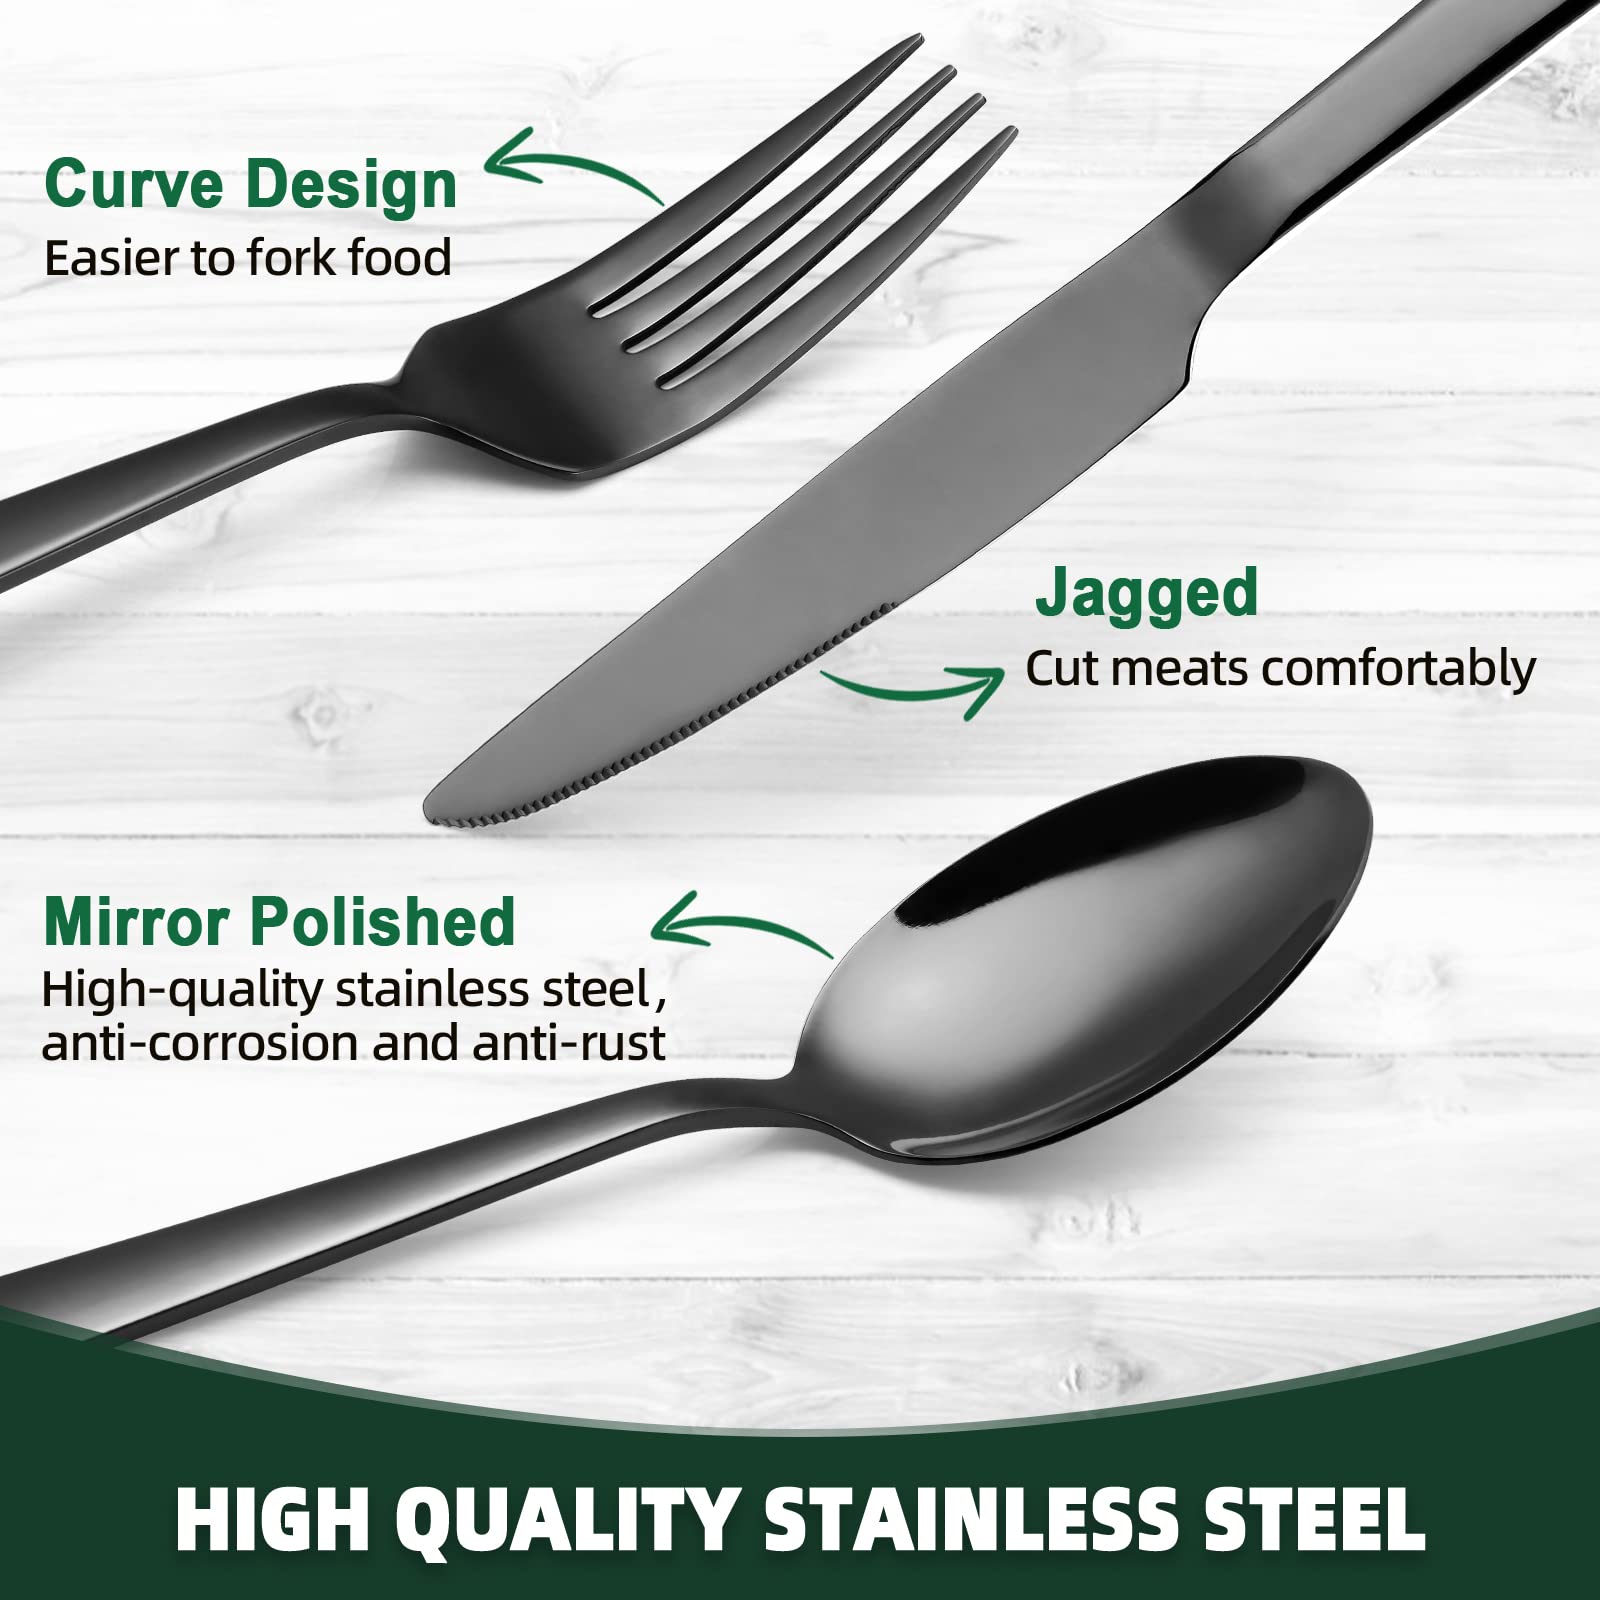 48 Pieces Black Silverware Set with Steak Knives, CEKEE Stainless Steel silverware set for 8, Black Flatware Cutlery Kitchen Utensils Set, Spoons and Forks Set, Mirror Polished & Heavy Duty